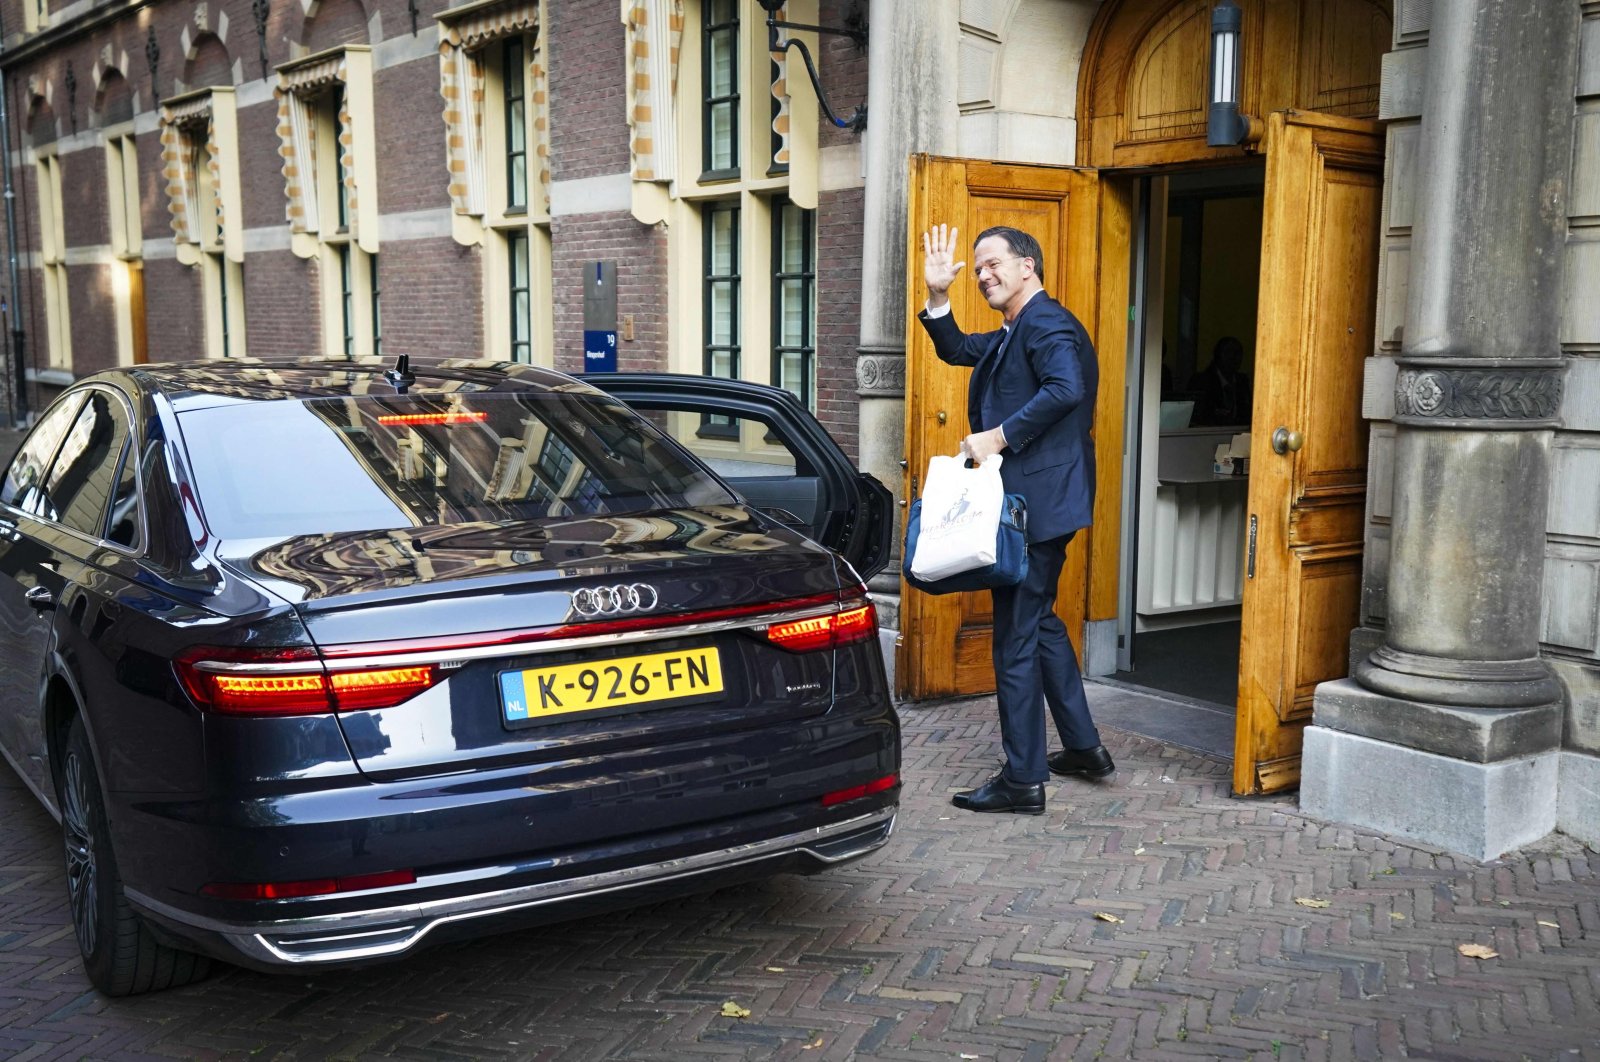 The Netherlands' Prime Minister Mark Rutte arrives at the Ministry of General Affairs on budget day, in The Hague, the Netherlands, Sept. 21, 2021. (AFP Photo)